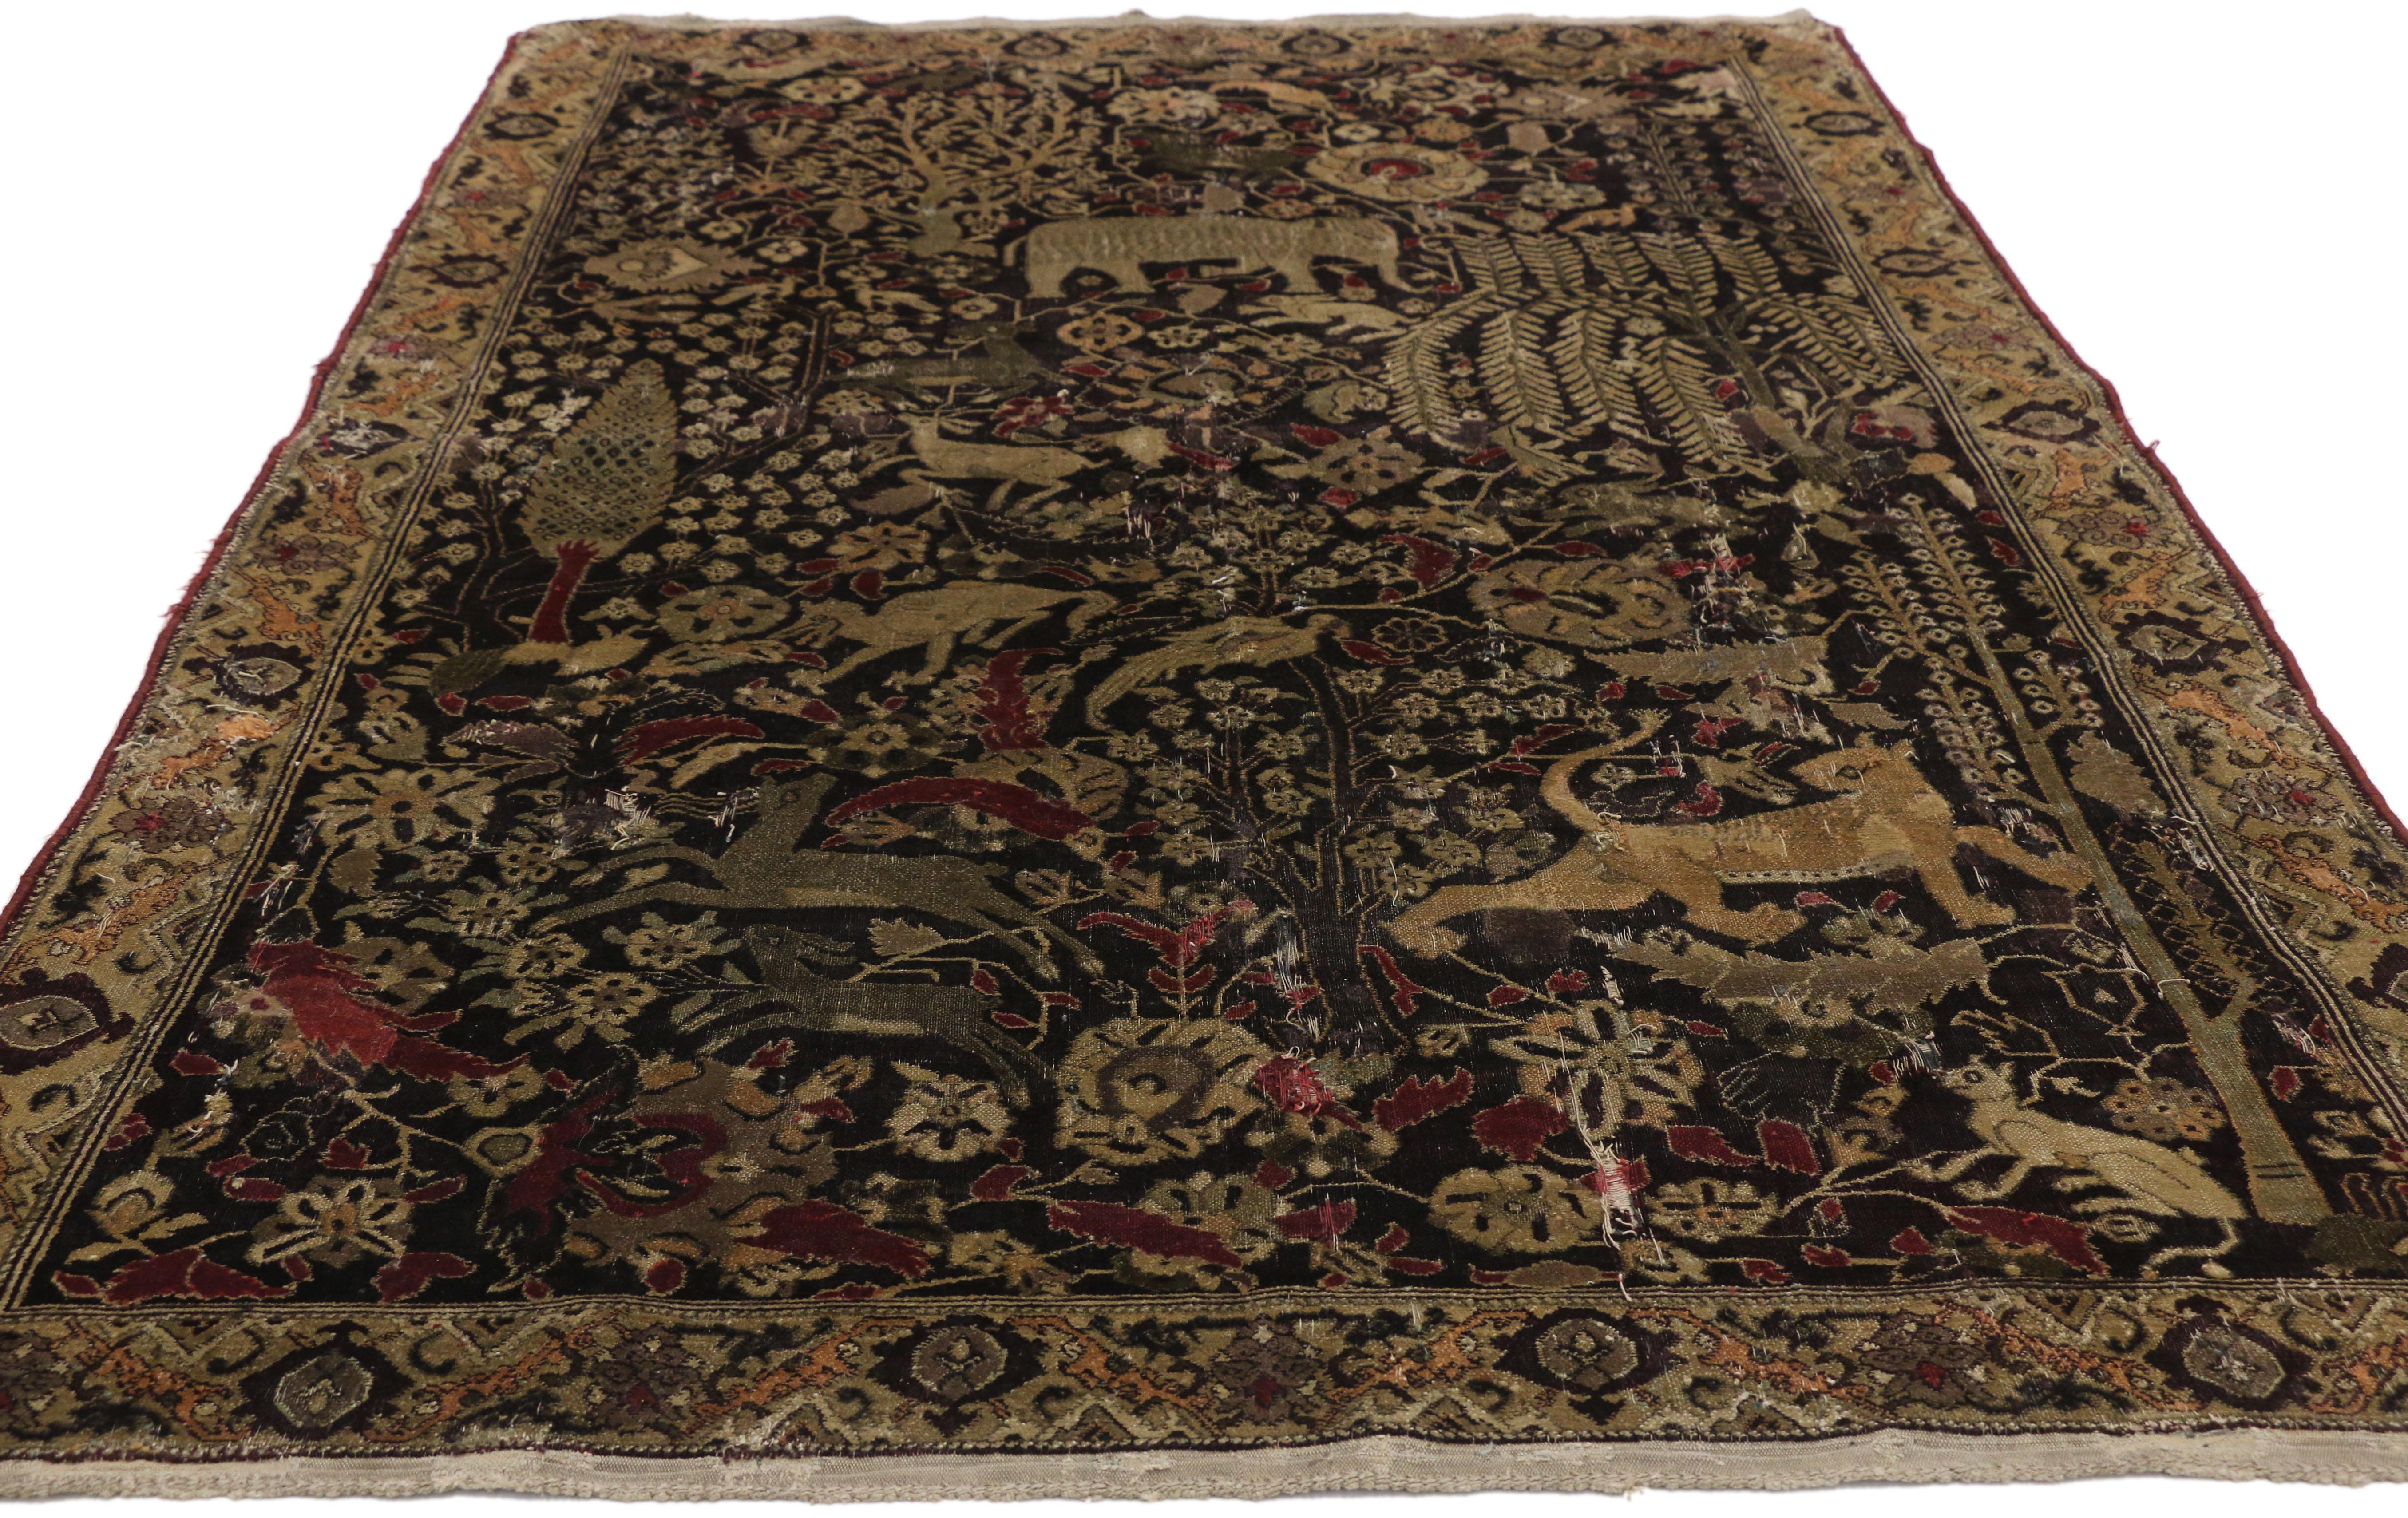 Hand-Knotted Late 19th Century Medieval Distressed Antique Indian Agra Rug with Hunting Scene